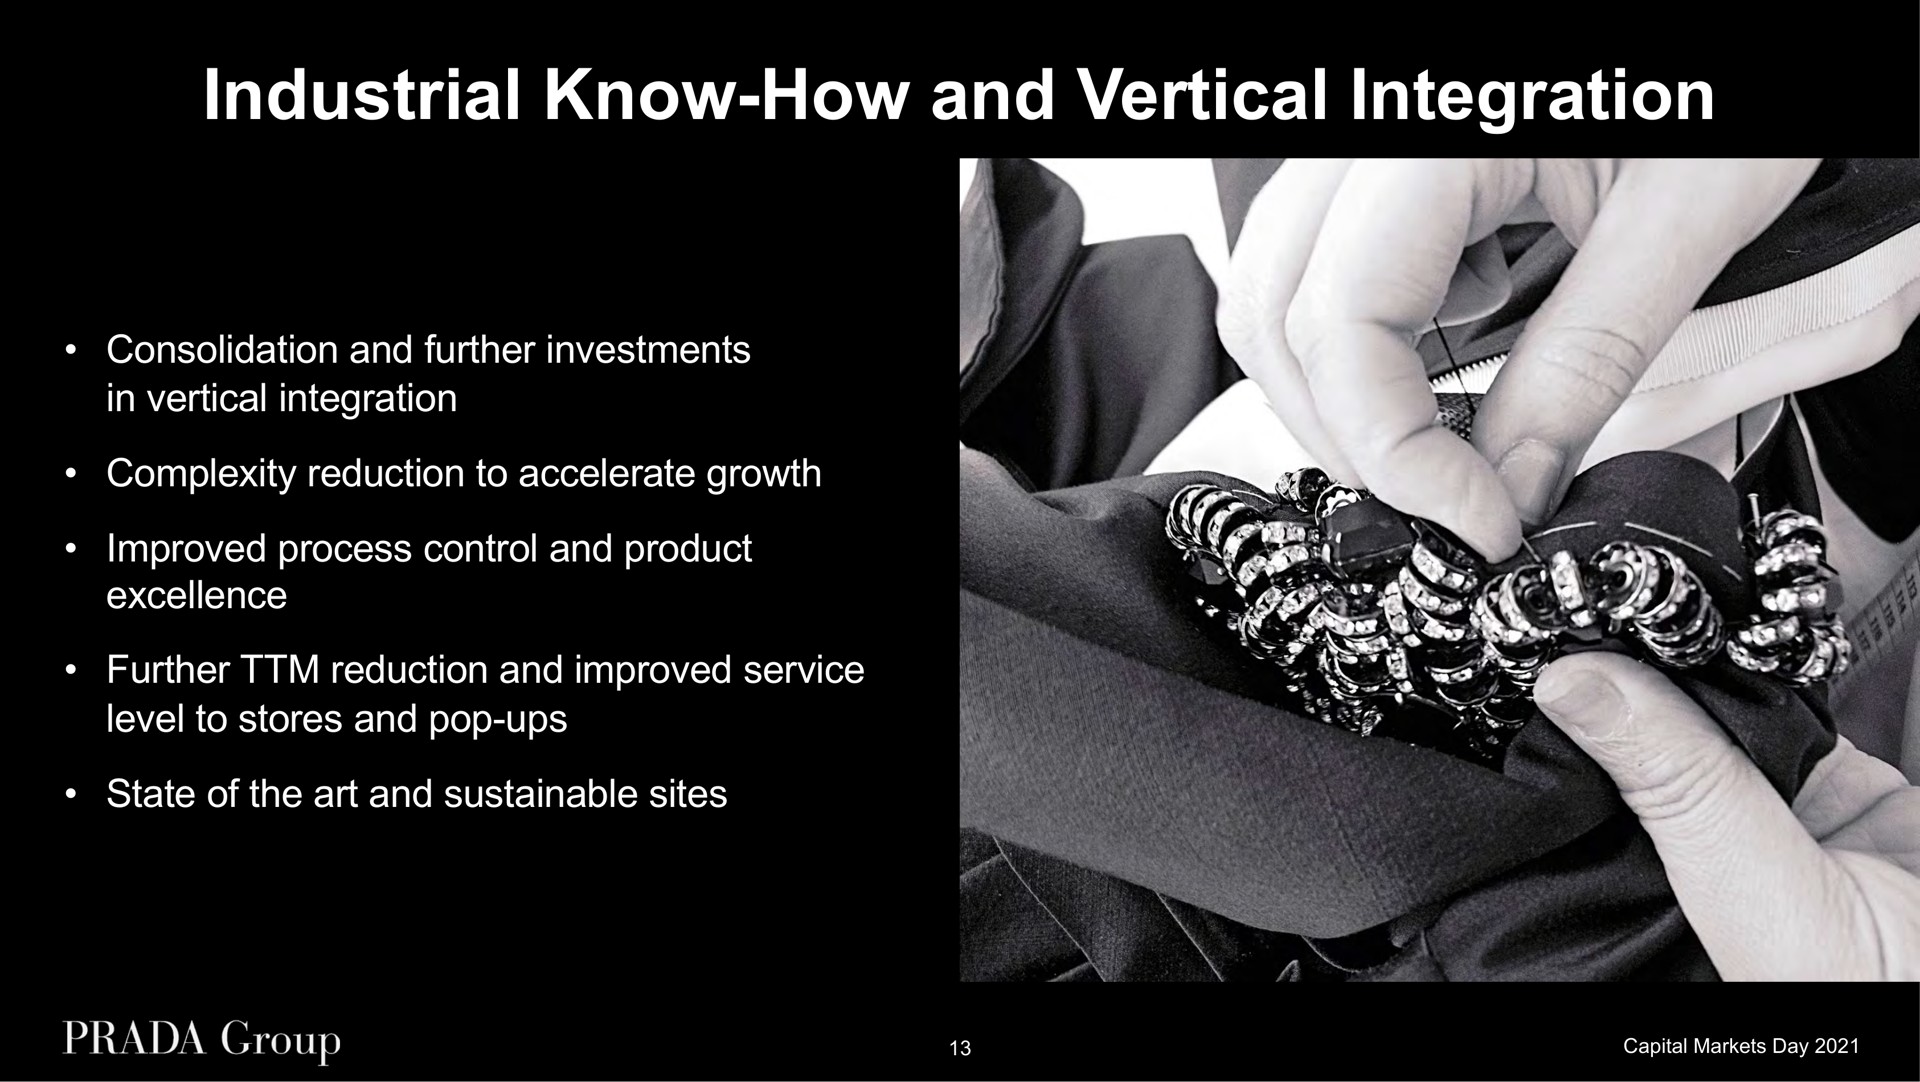 industrial know how and vertical integration consolidation and further investments in vertical integration complexity reduction to accelerate growth improved process control and product excellence further reduction and improved service level to stores and pop ups state of the art and sustainable sites | Prada